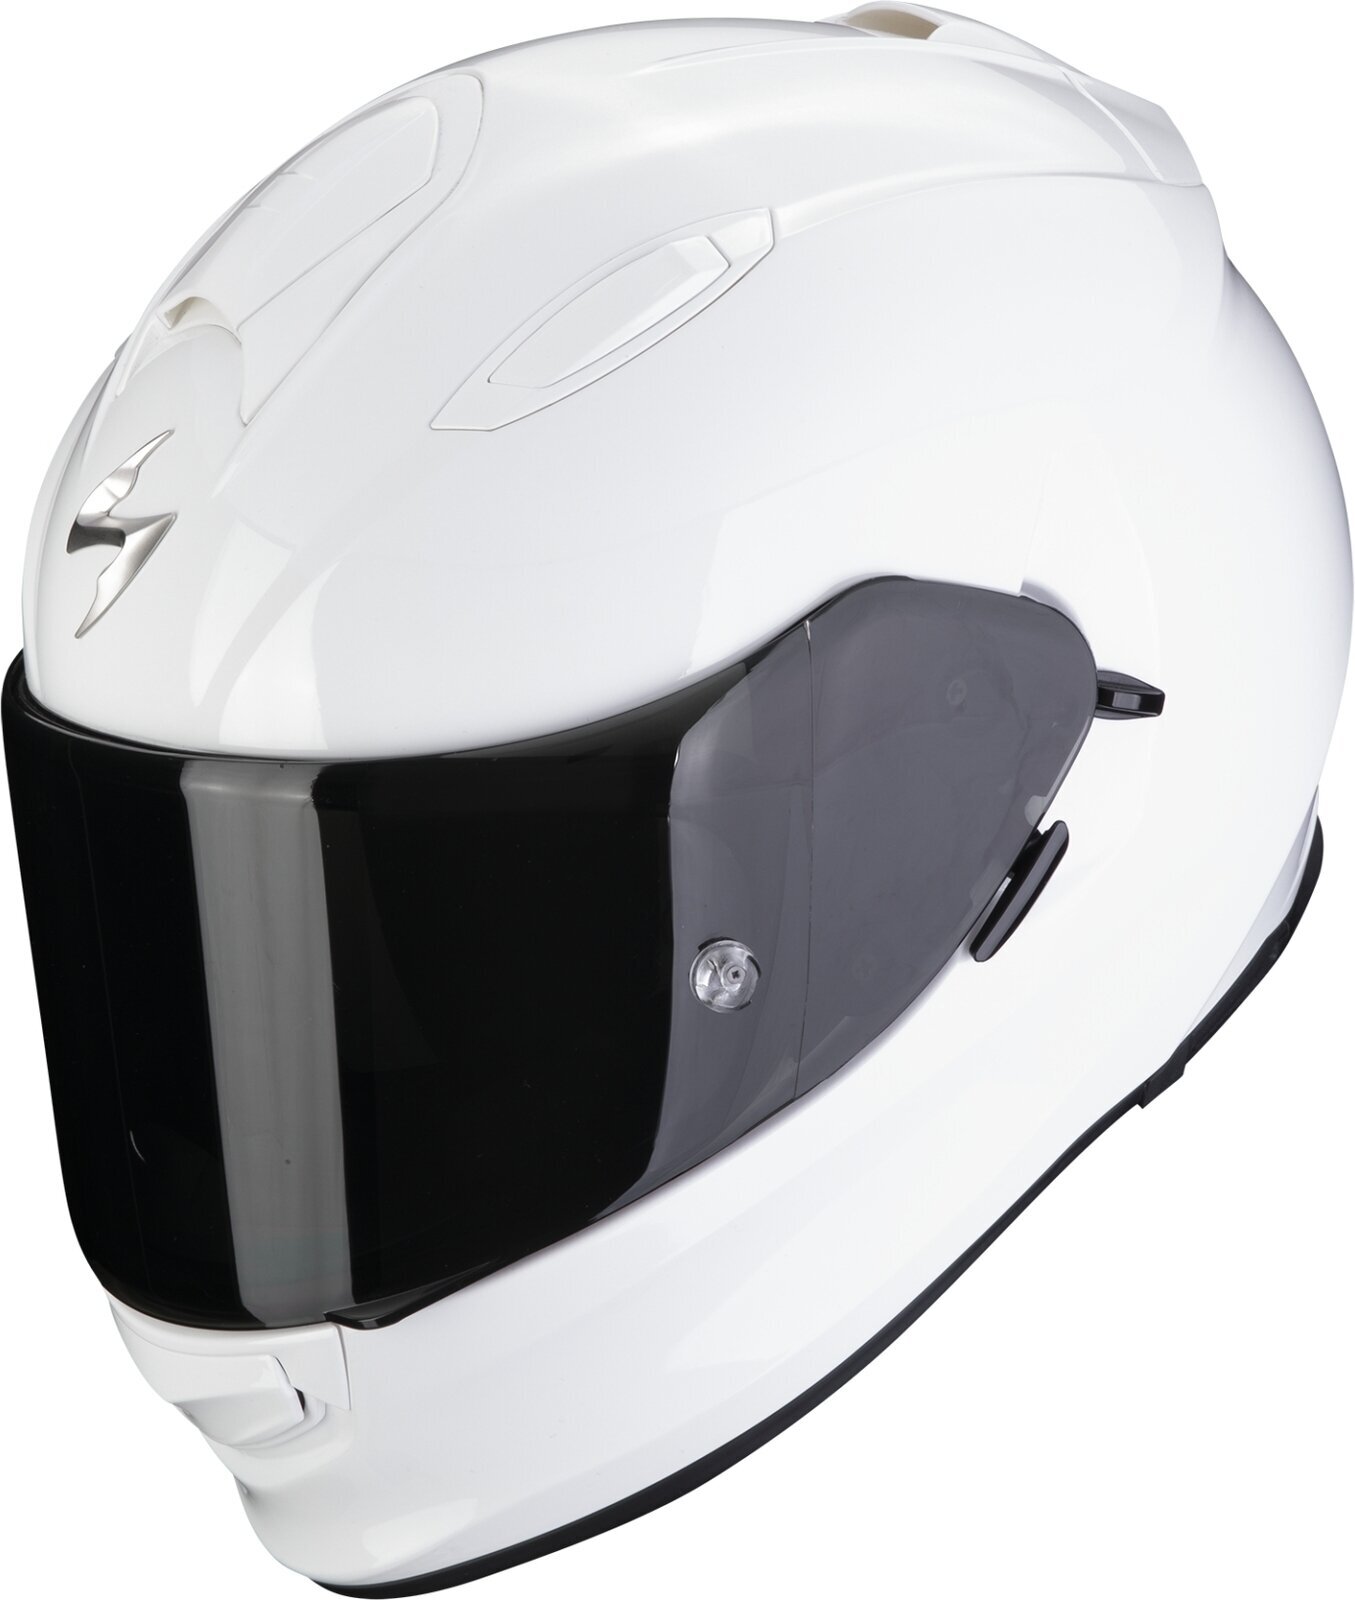 Helm Scorpion EXO 491 SOLID White XL Helm